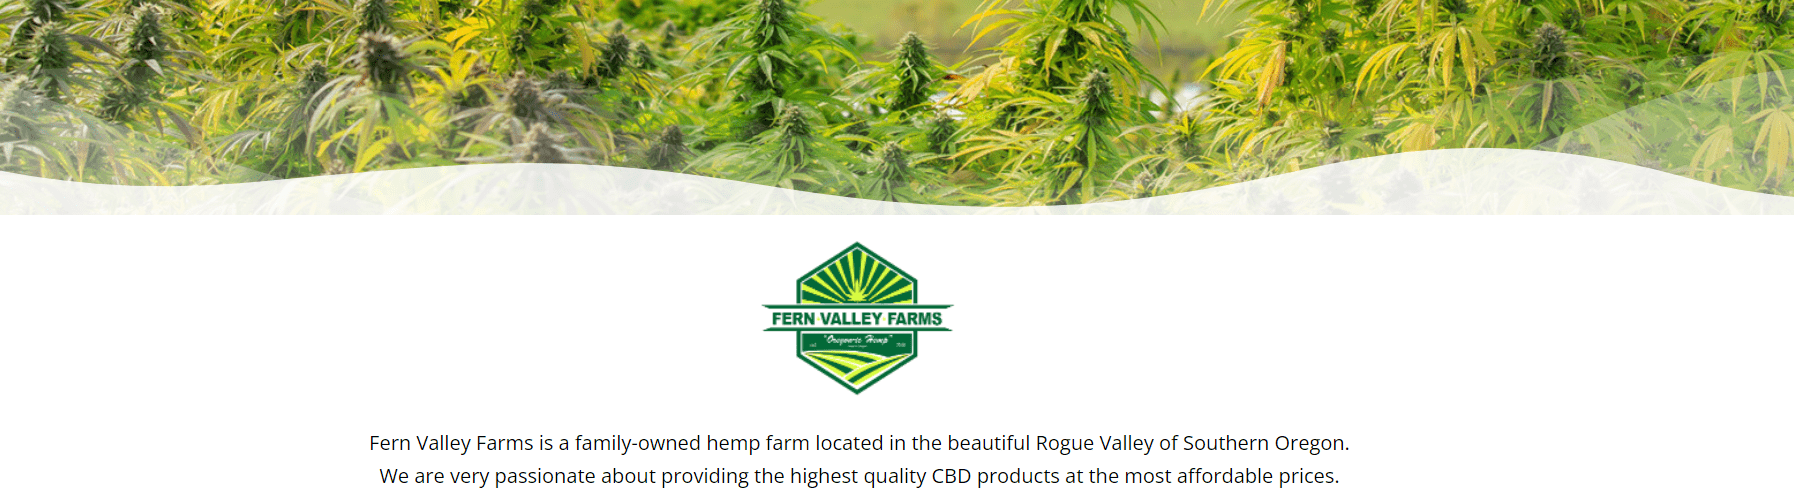 review-of-fern-valley-farms